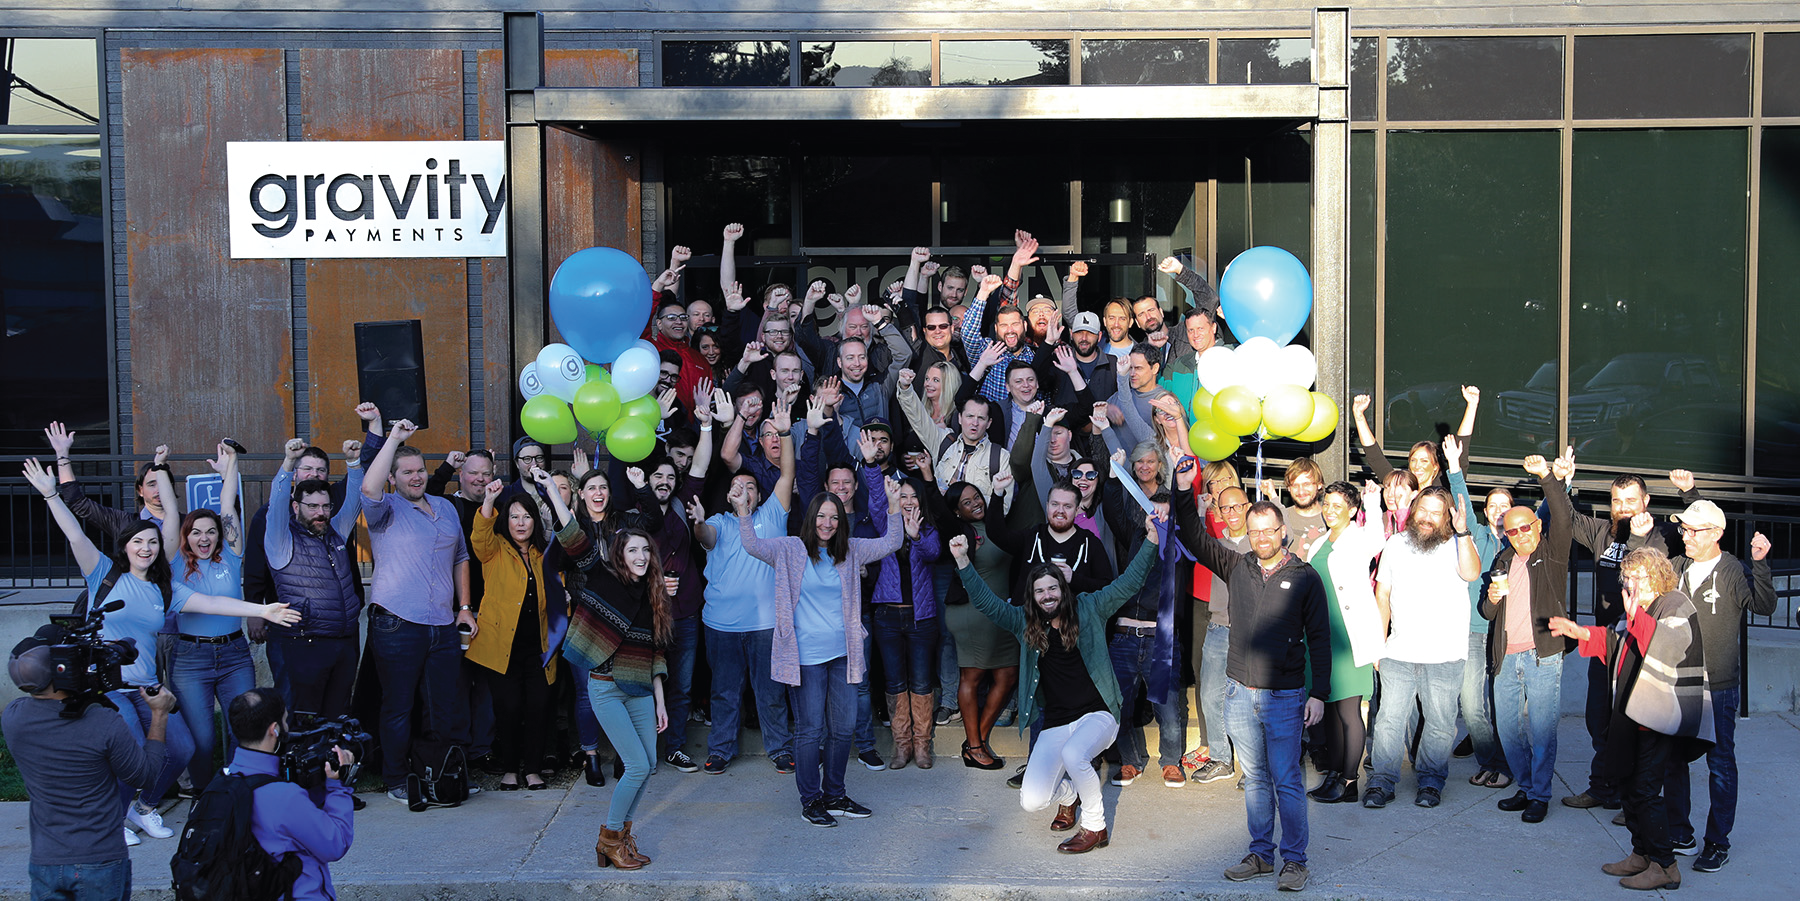 A large group of people stand outside the door of a business, their arms in the air in celebration.